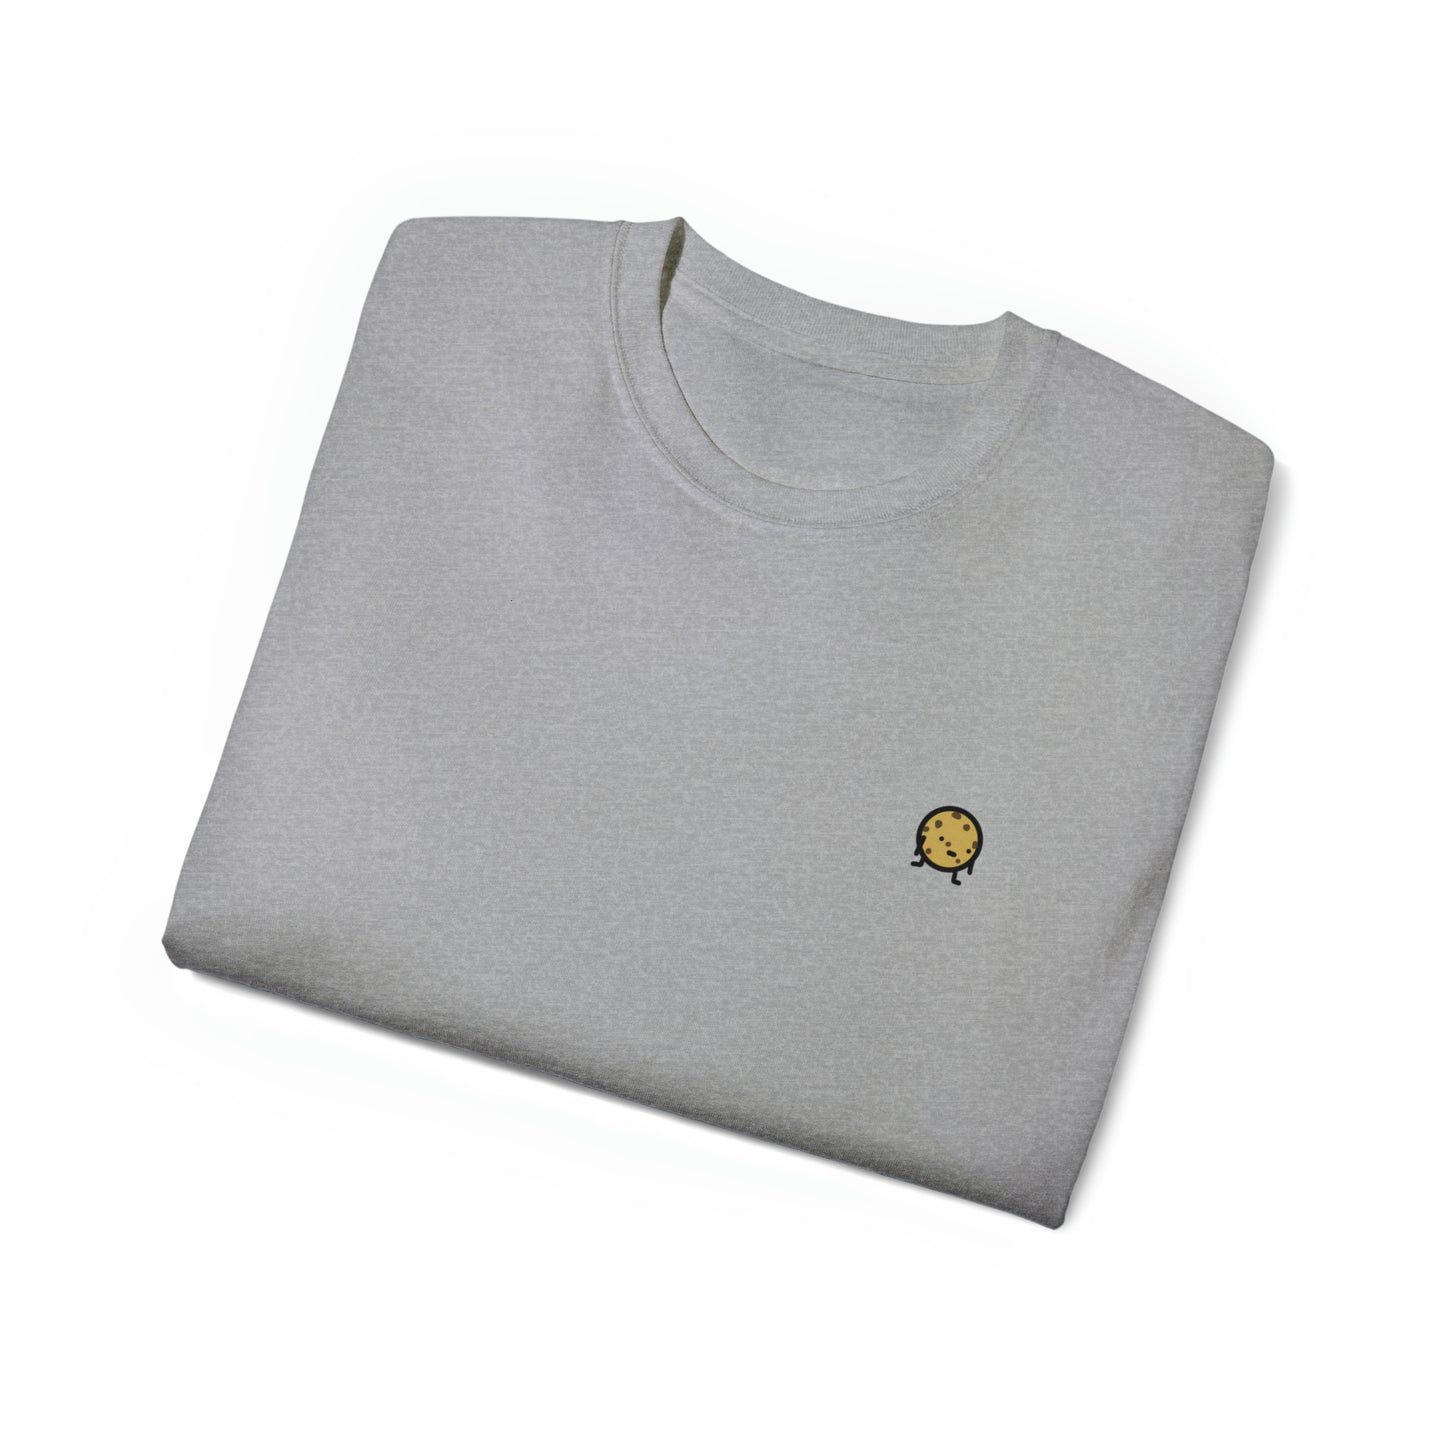 Small Cookie - Adult Unisex Ultra Cotton Tee